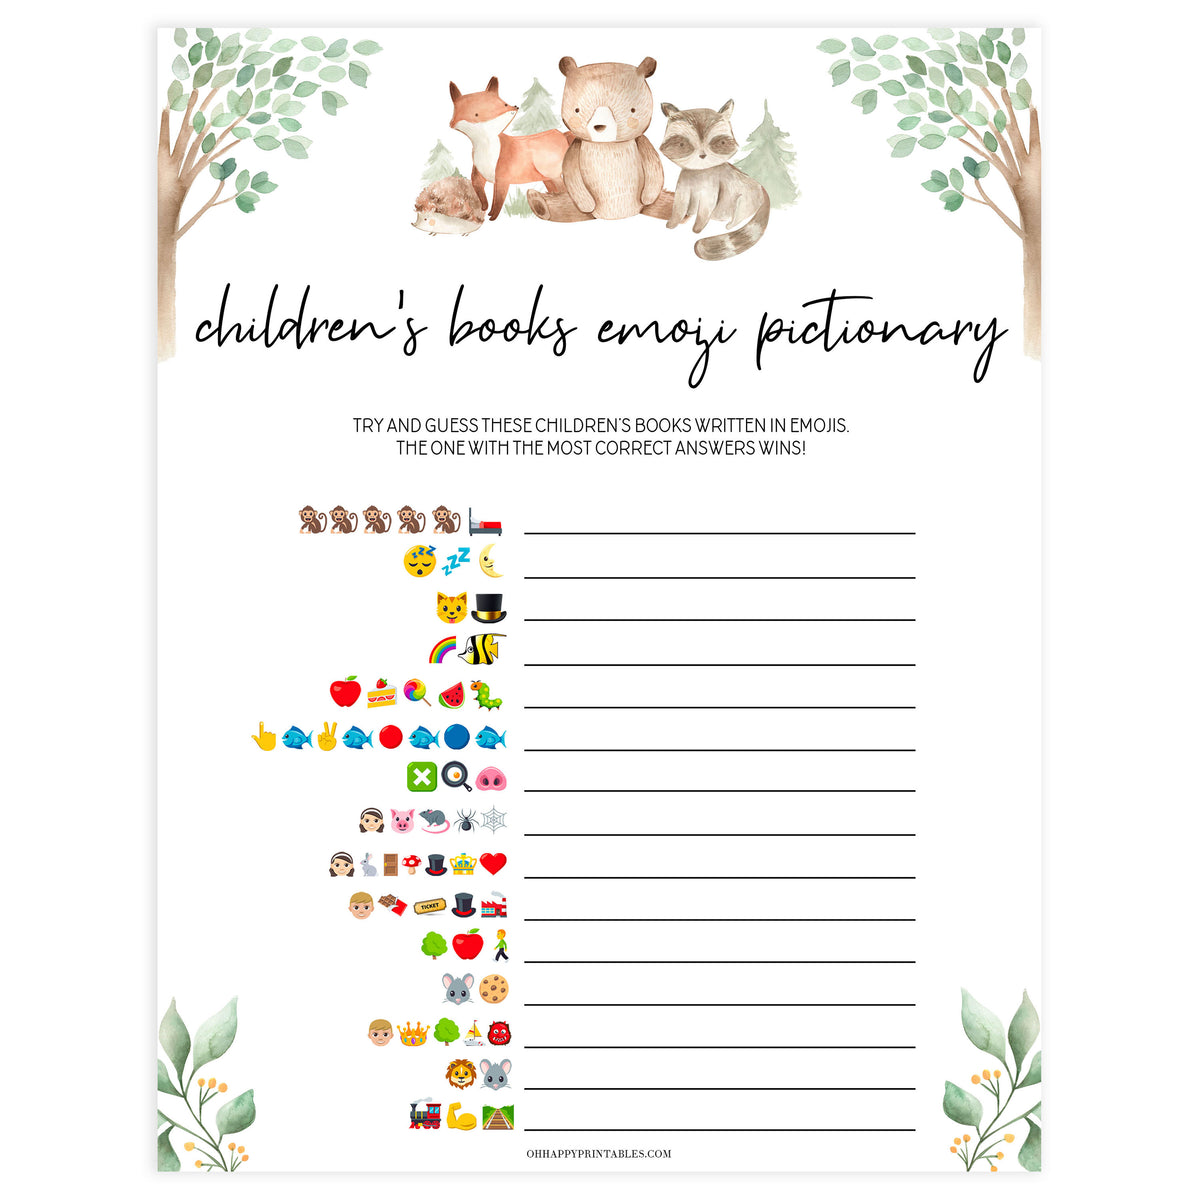 childrens books emoji pictionary games, Printable baby shower games, woodland animals baby games, baby shower games, fun baby shower ideas, top baby shower ideas, woodland baby shower, baby shower games, fun woodland animals baby shower ideas